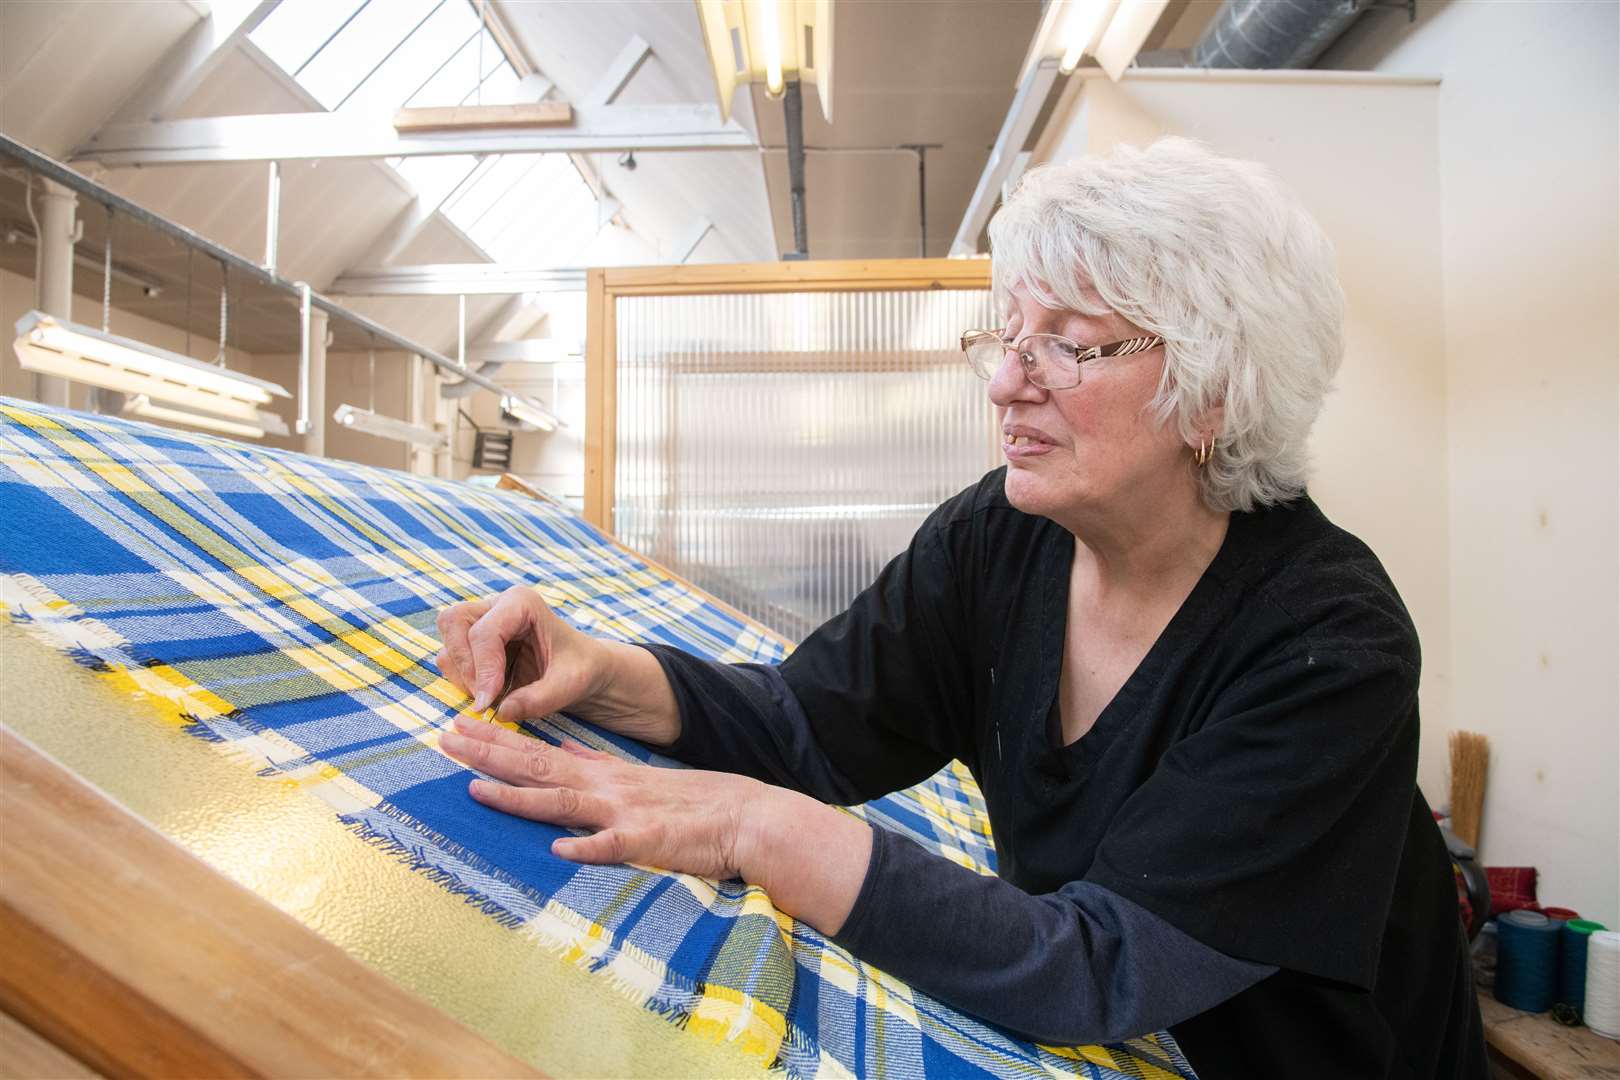 Isobel Ogg, who checks the tartan after production for any issues. Picture: Daniel Forsyth